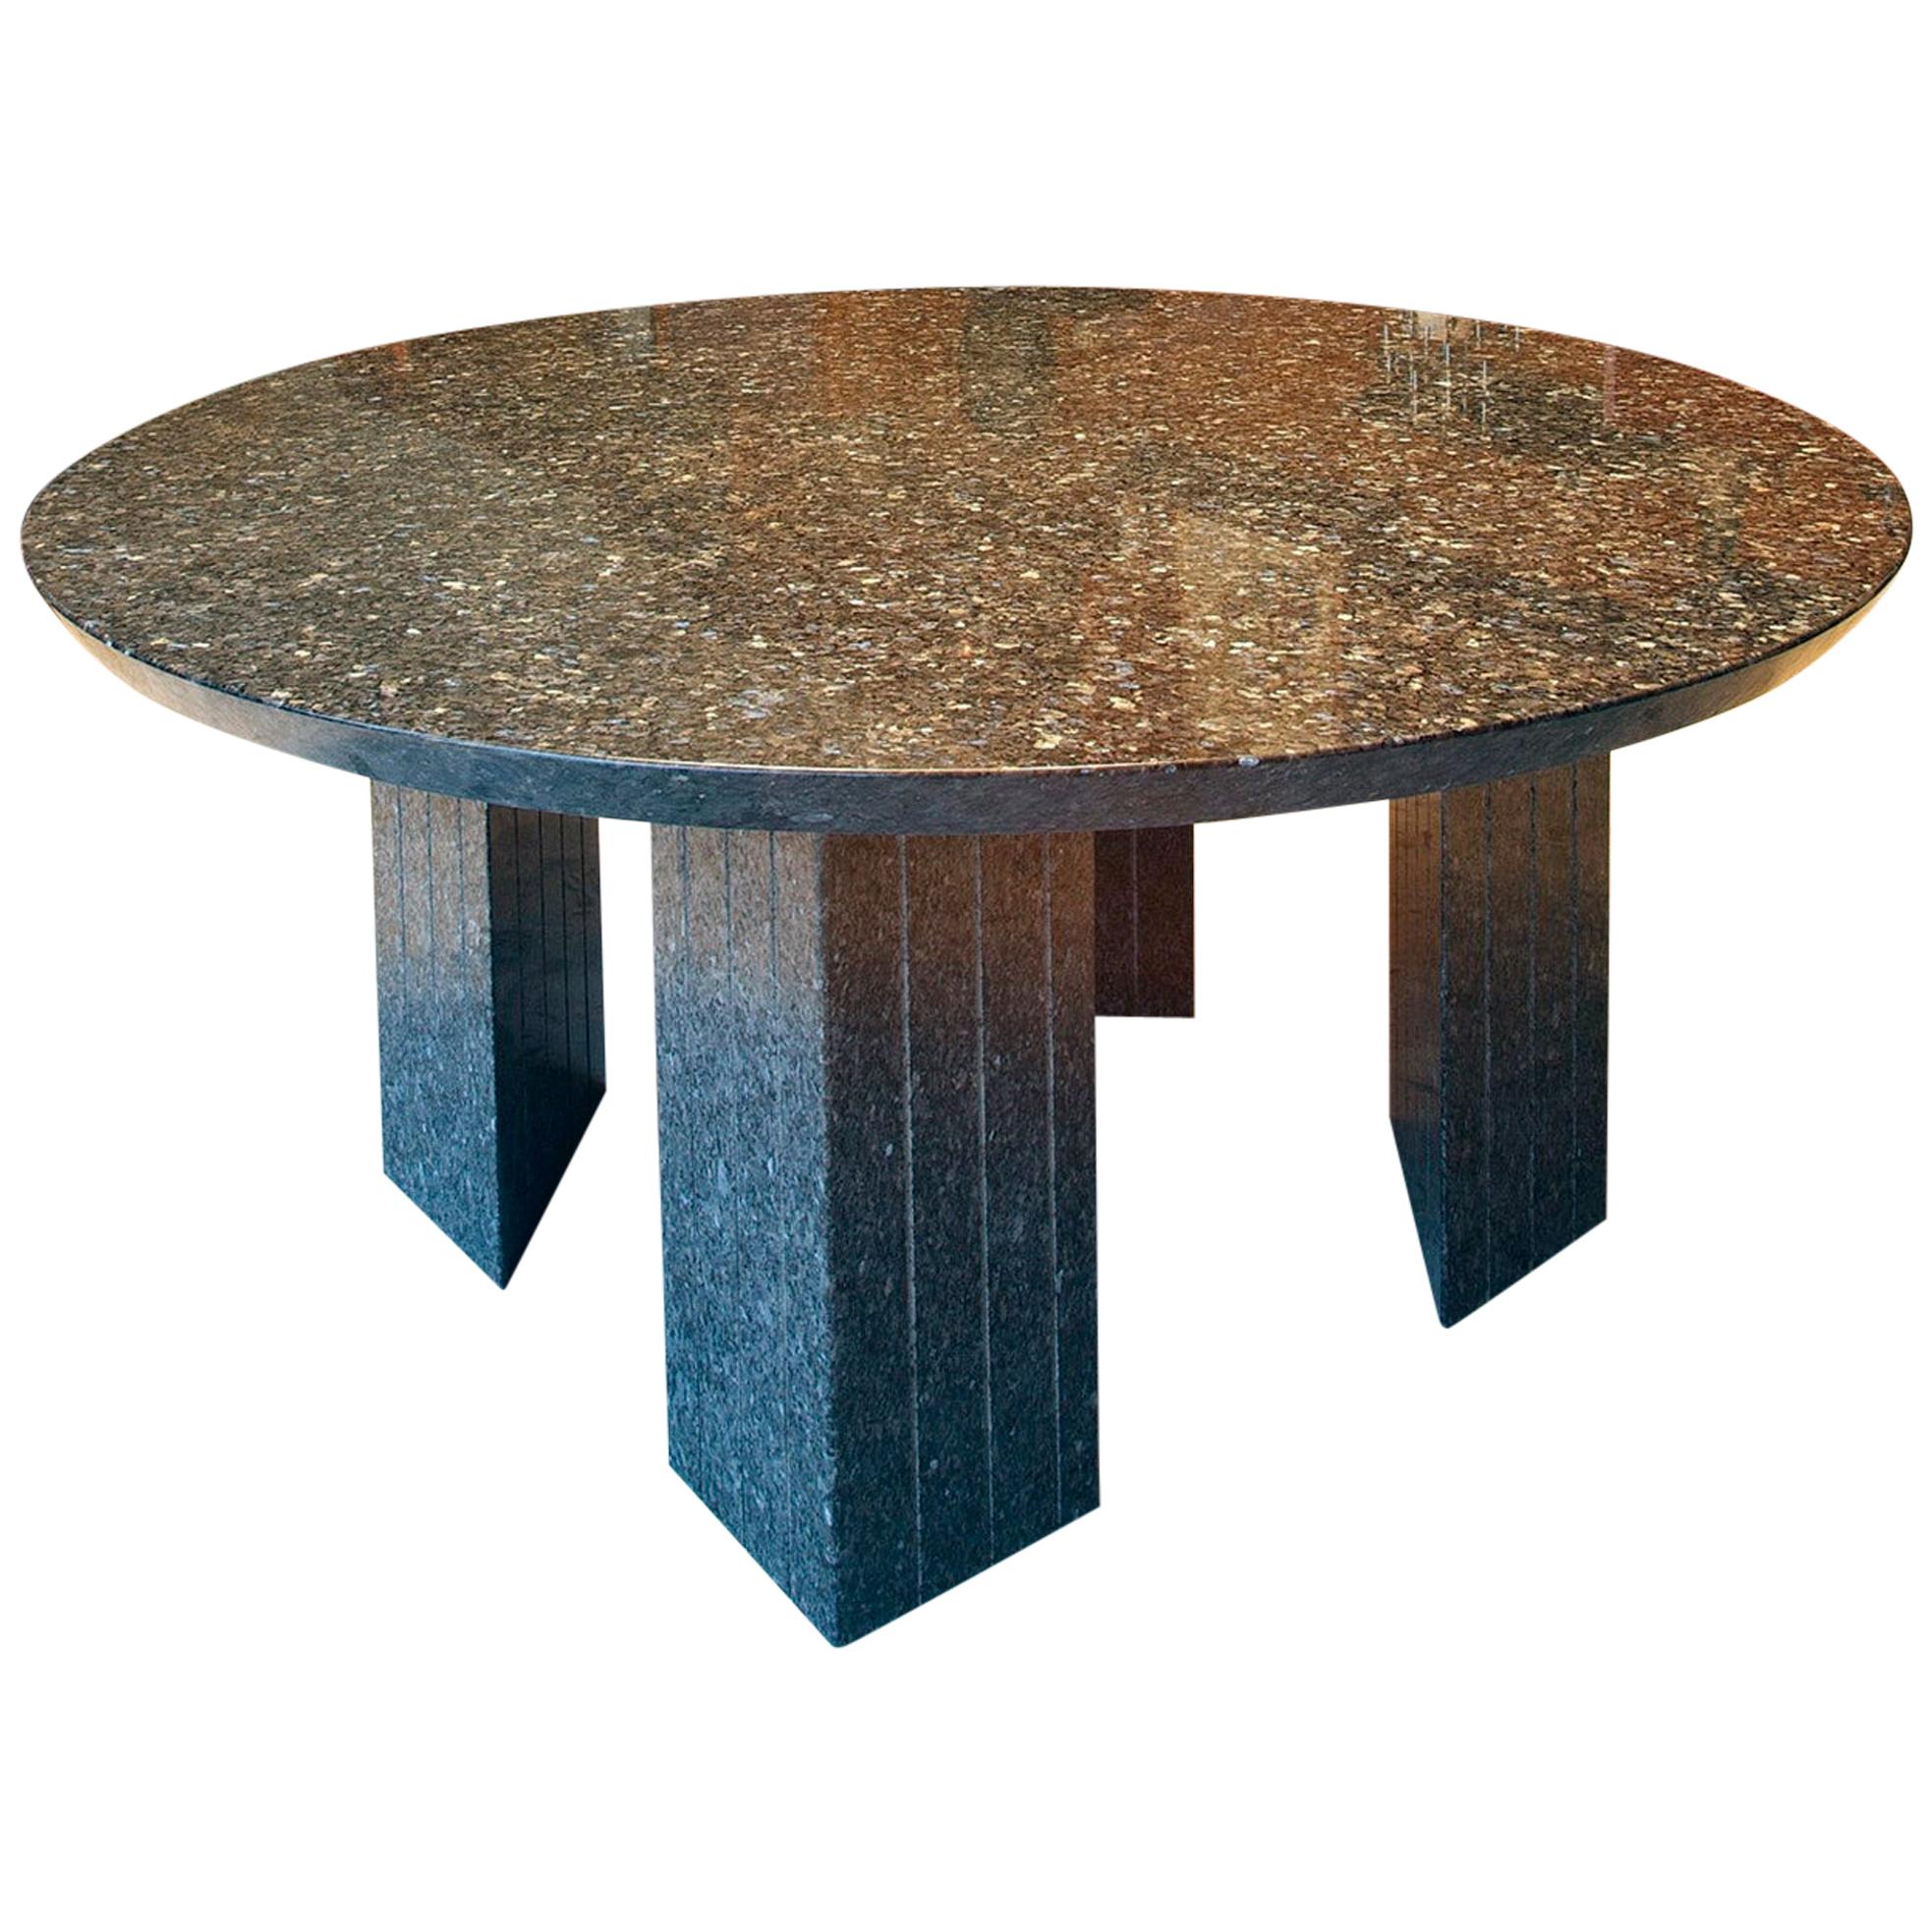 Large Round Table in Granite 10 Seats